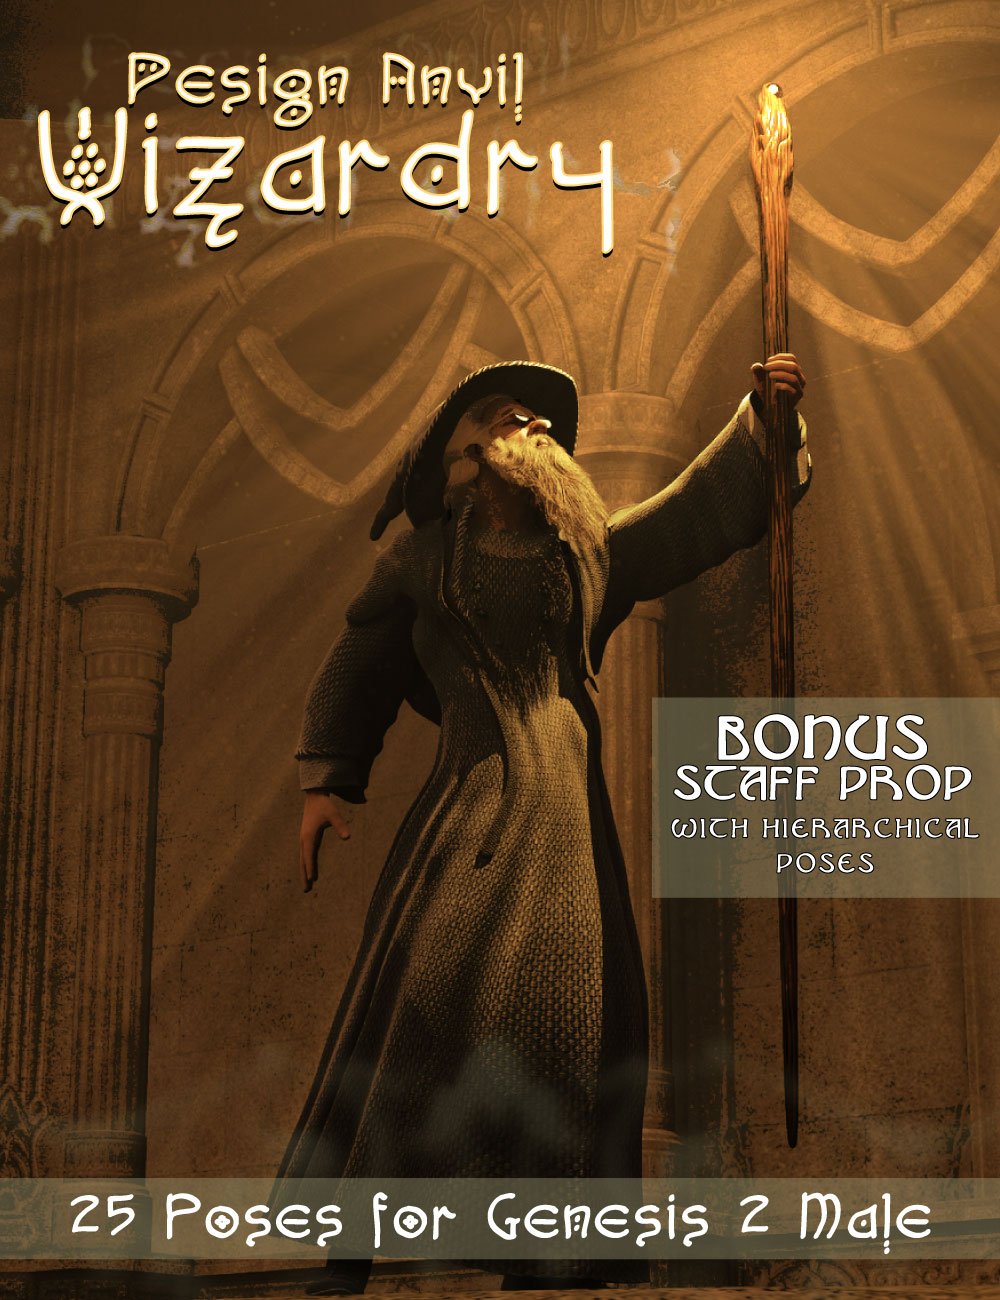 DA Wizardry Poses by: Design Anvil, 3D Models by Daz 3D